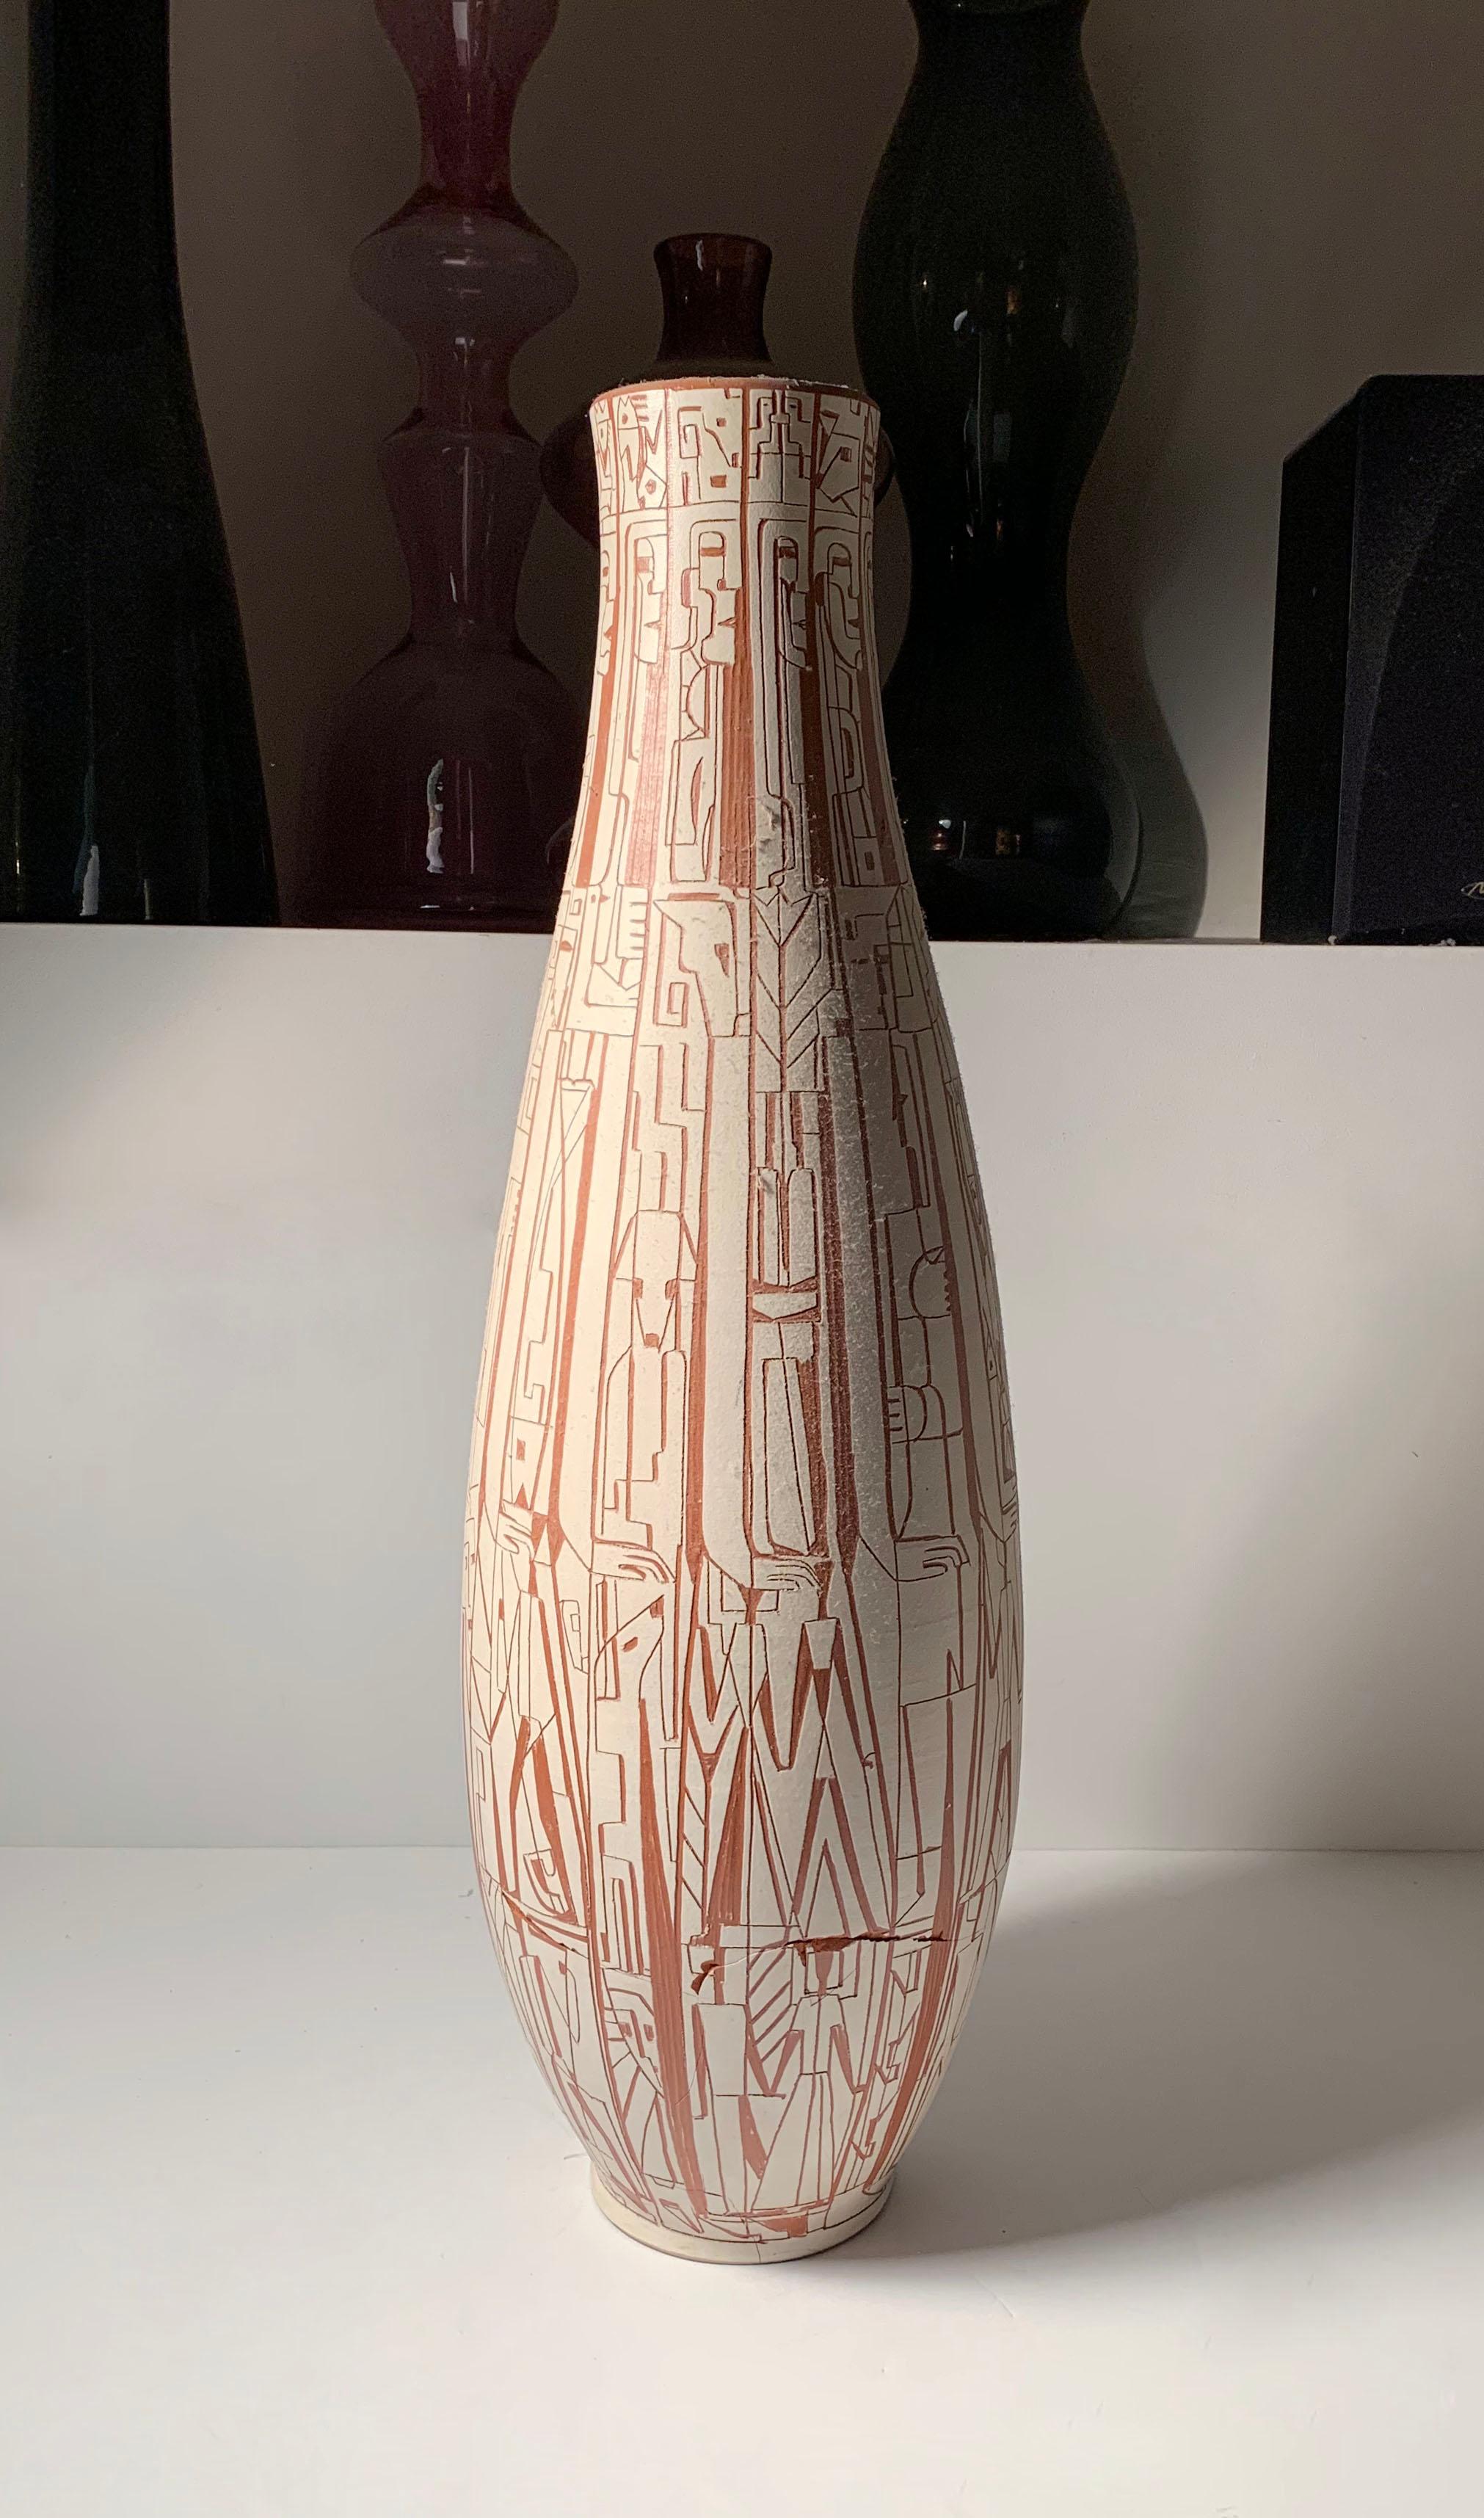 Monumental Theo & Susan Harlander Brooklin pottery cubist vase.

Vase has bad damage to it in need of restoration. Such a monumental and significant work by this couple that is worth restoring. Hairline with some lose around the hairline as